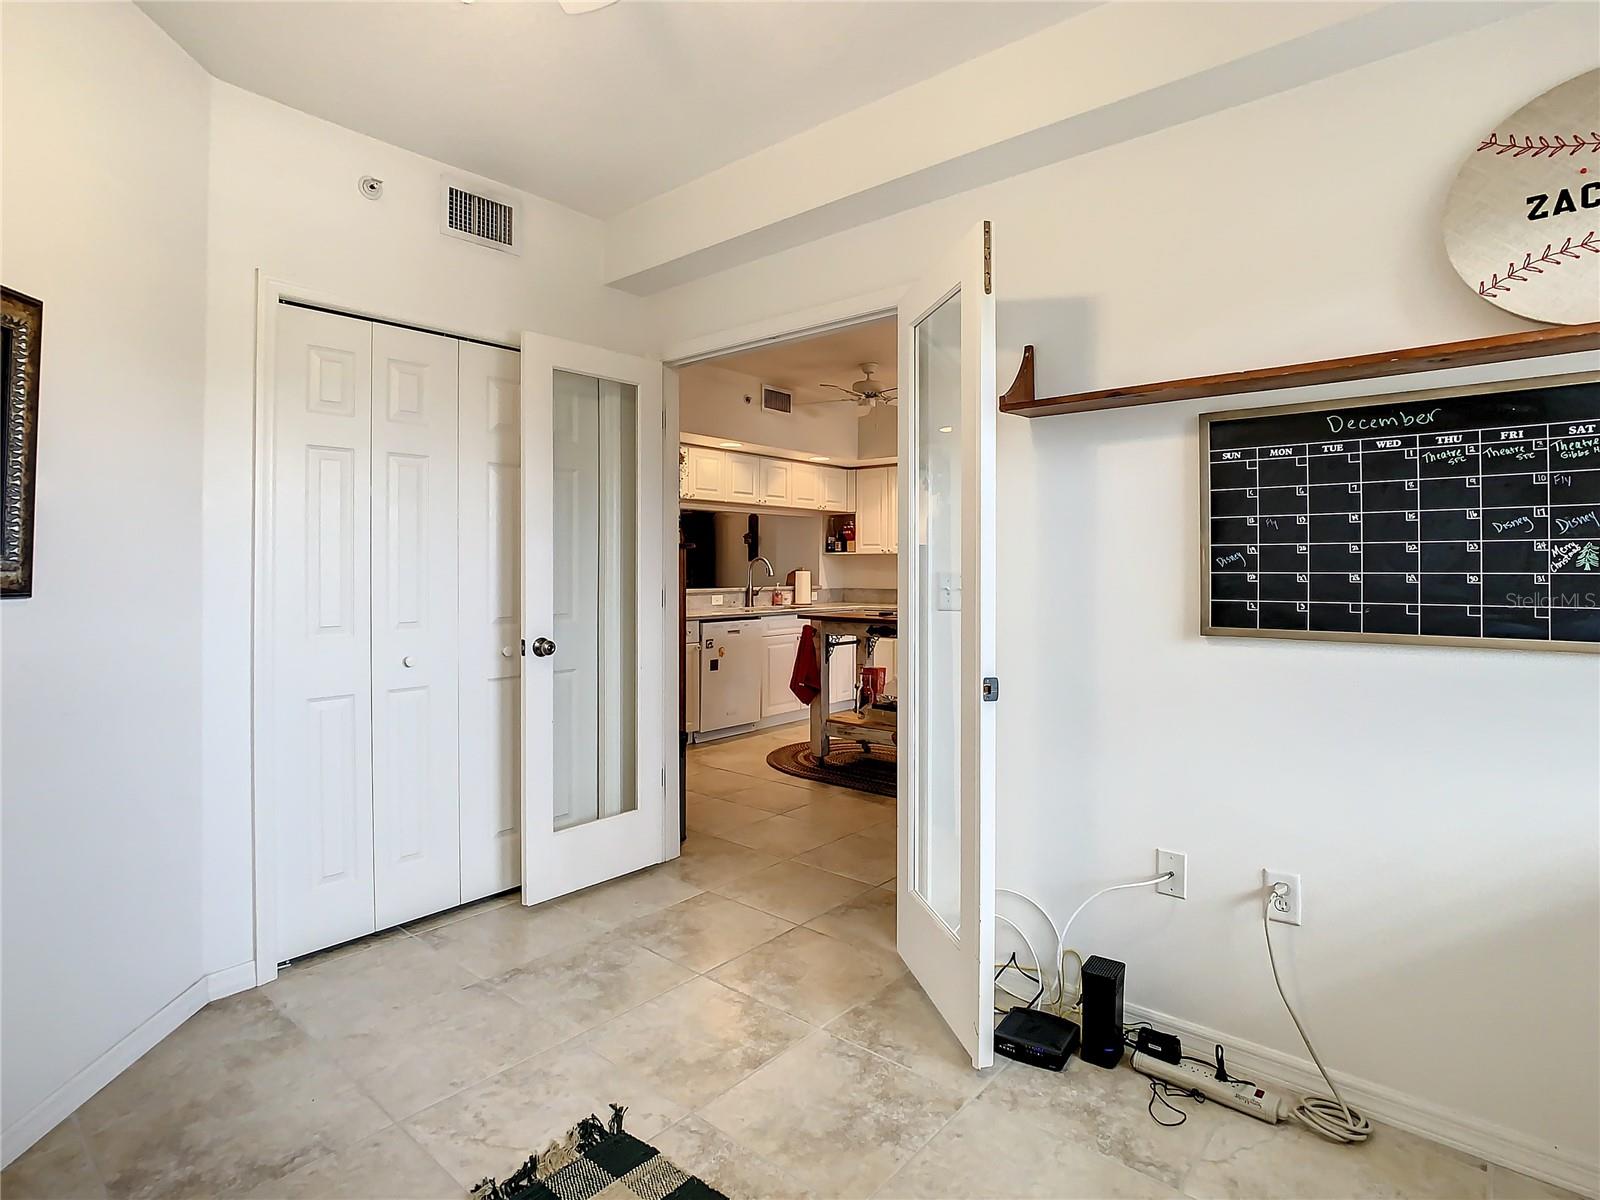 The third bedroom is located at the front of the home with stylish French doors making it perfect for an office or den